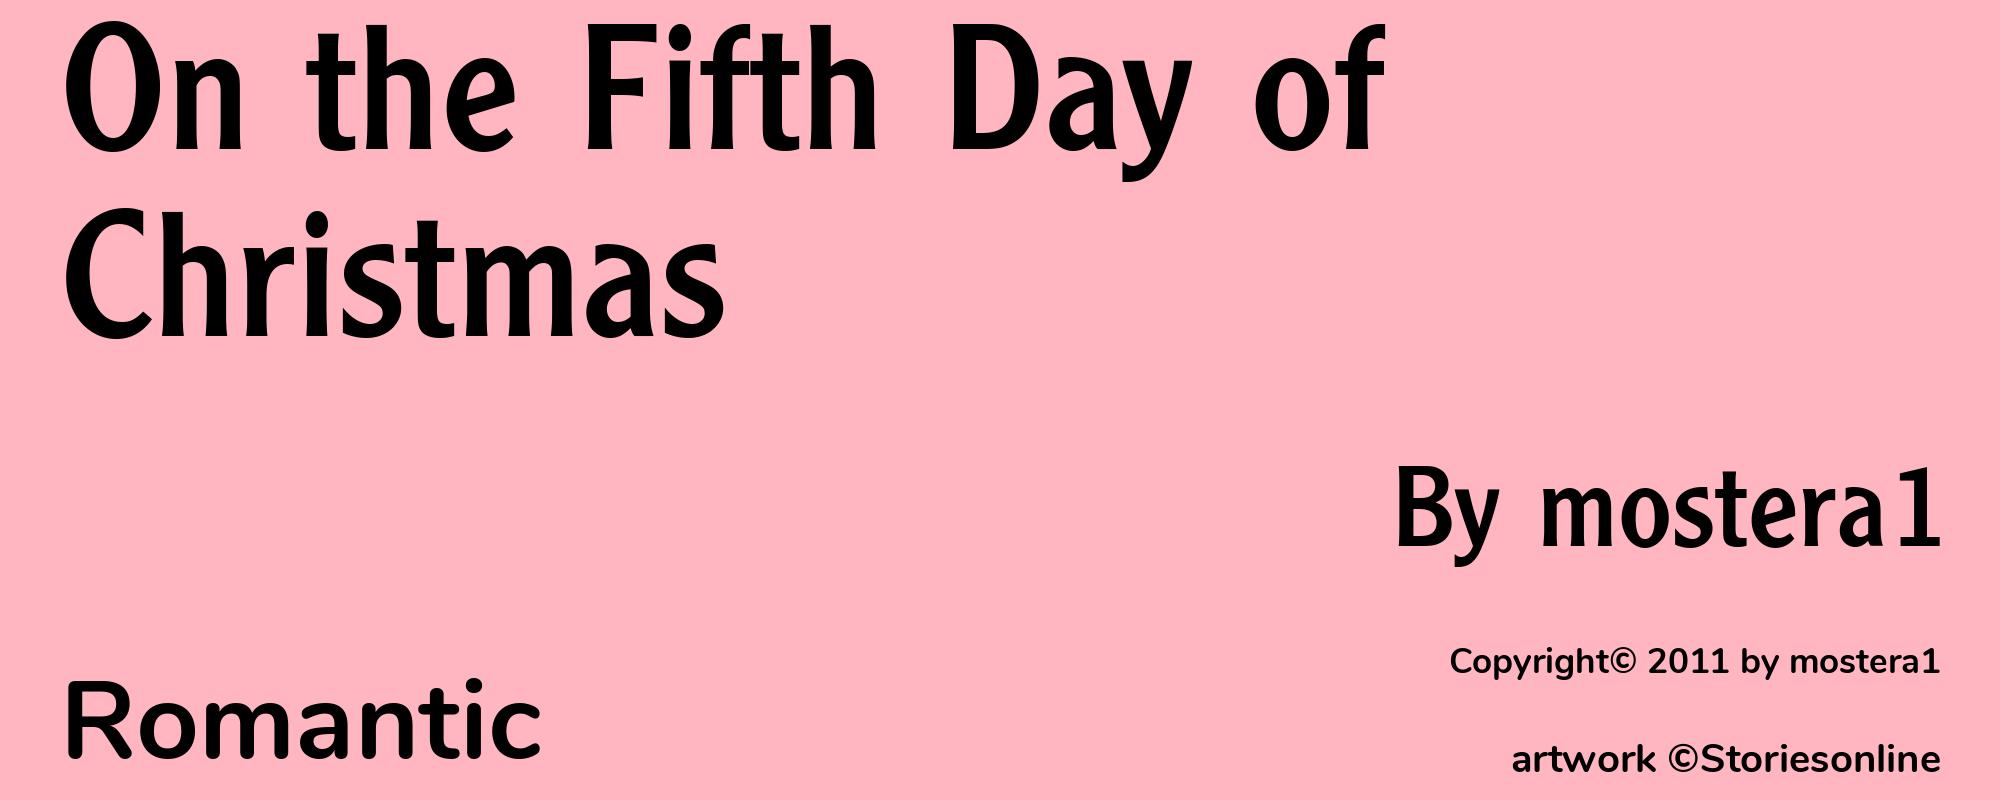 On the Fifth Day of Christmas - Cover